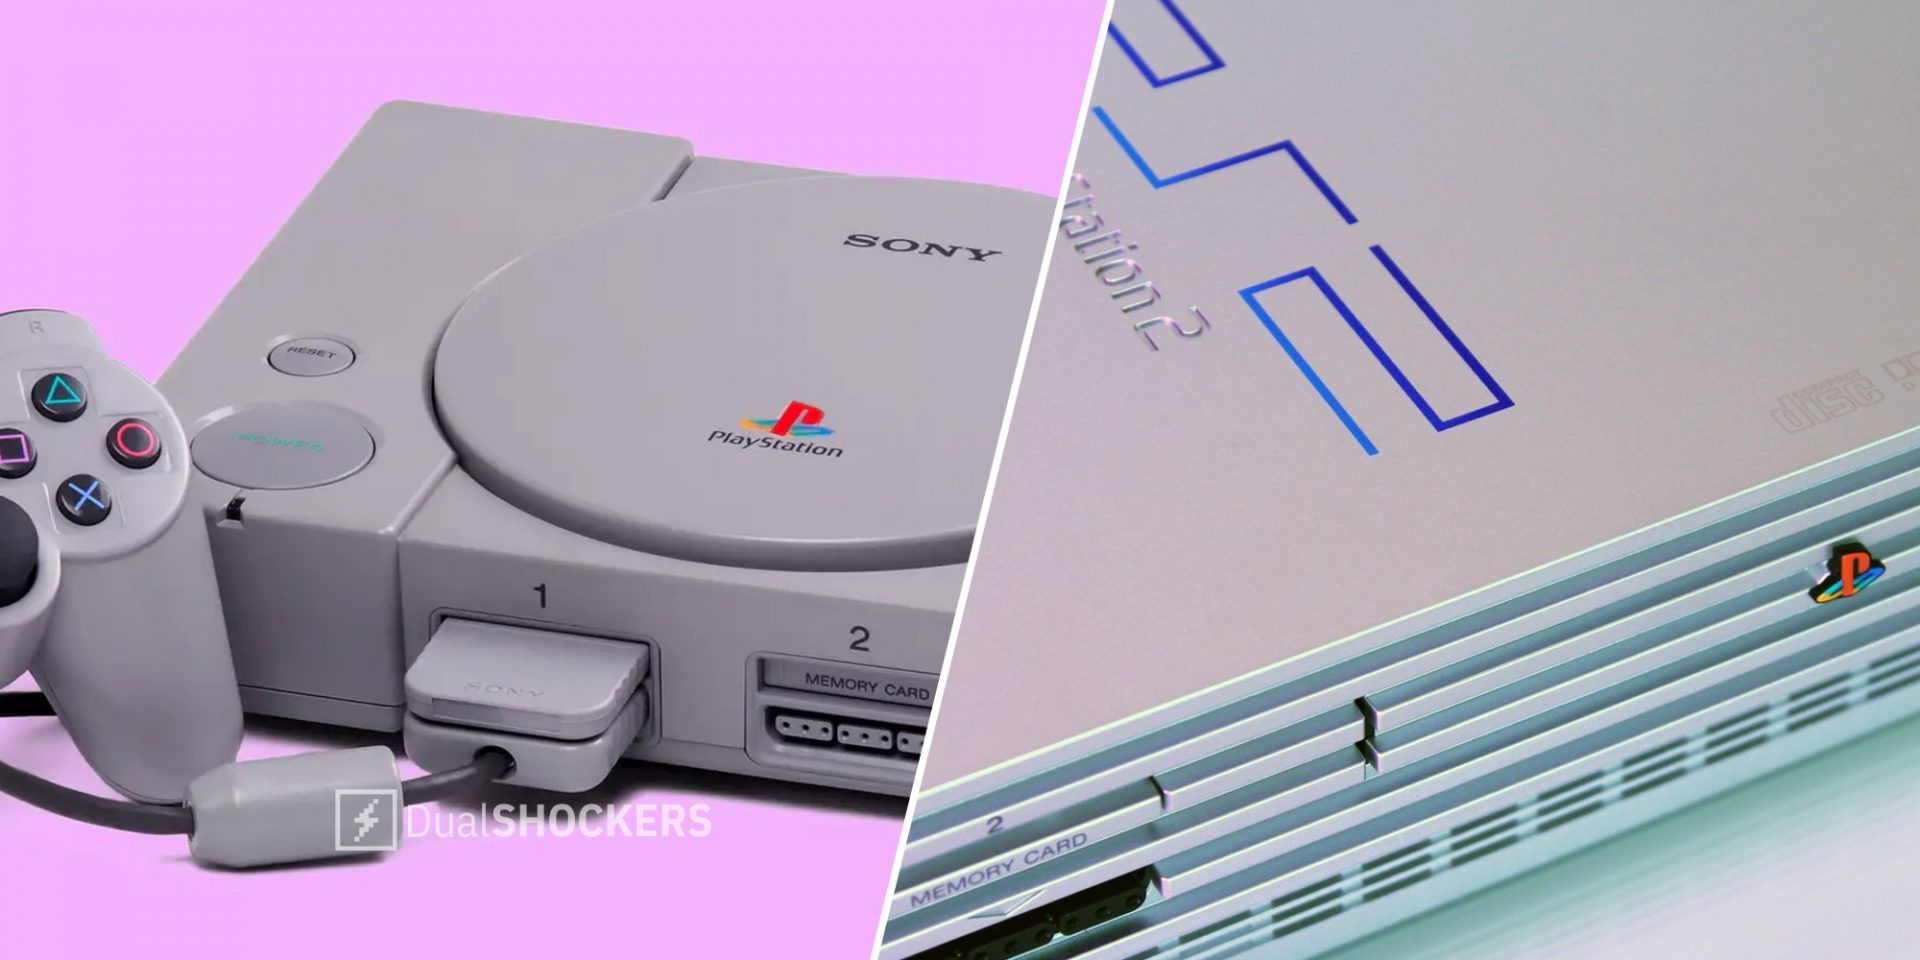 Playstation 1 console on left, Playstation 2 console on right